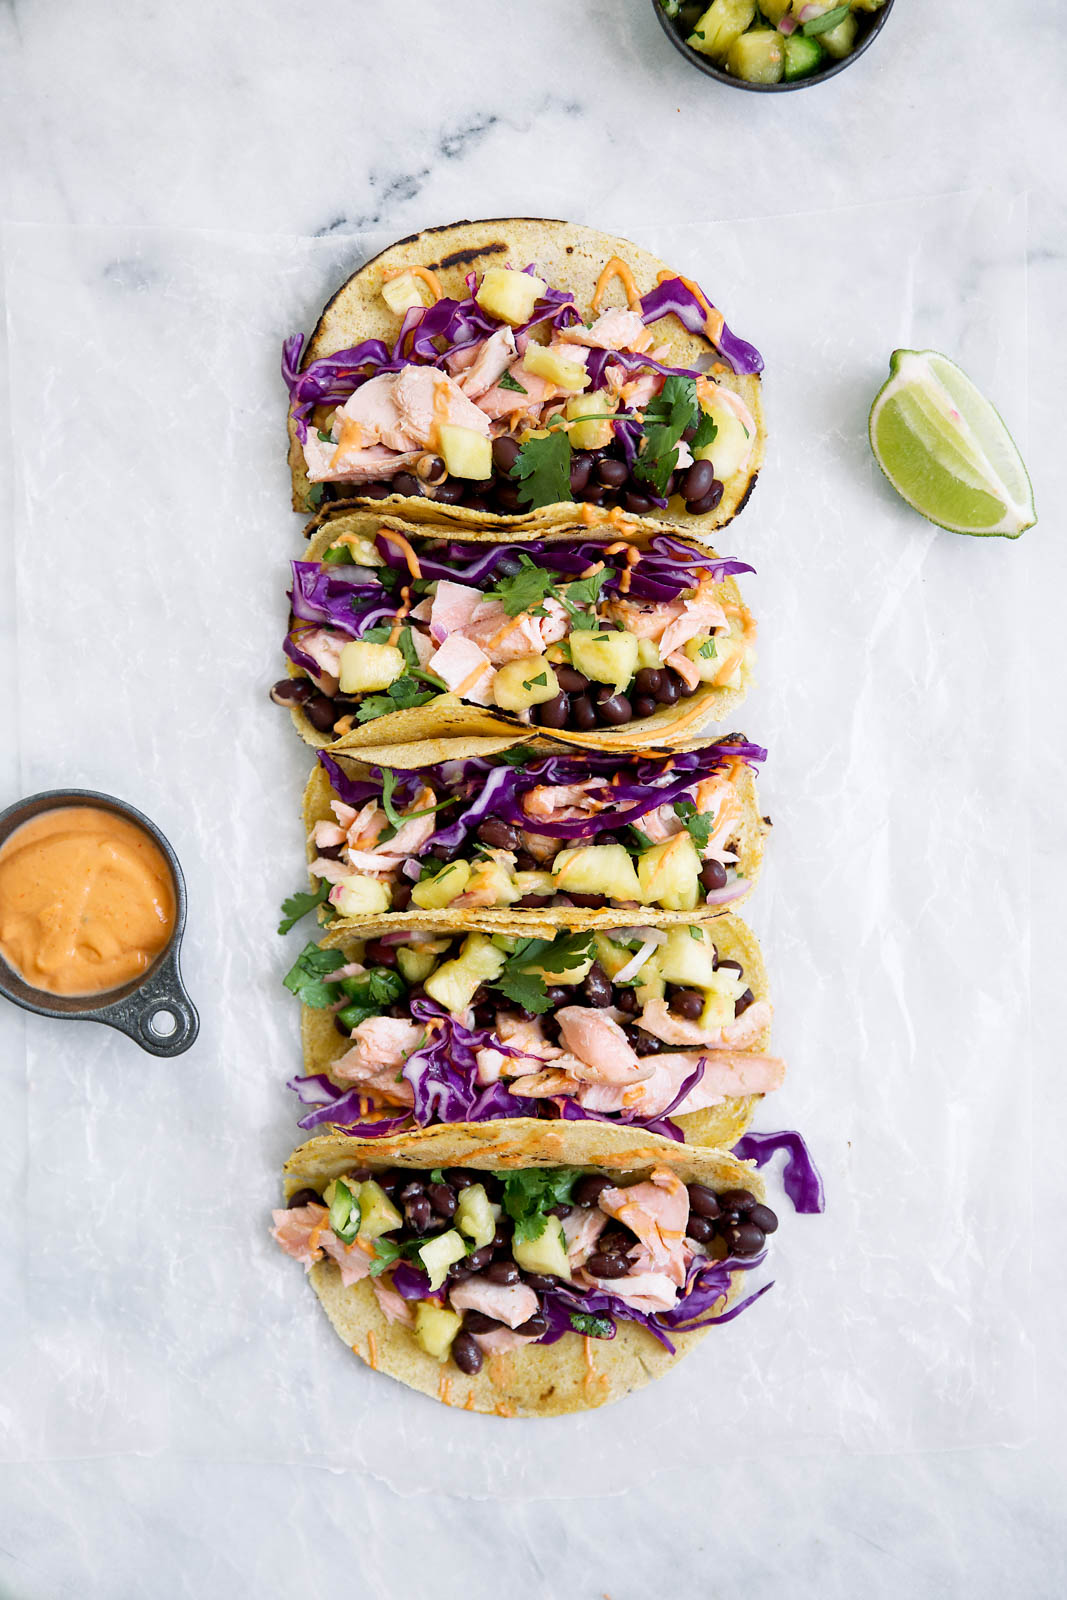 Coconut Salmon Tacos marinaded in coconut milk, lime, and ginger, complete with a homemade jalapeño pineapple salsa & sriracha mayo. A total hit for your next Taco Tuesday.